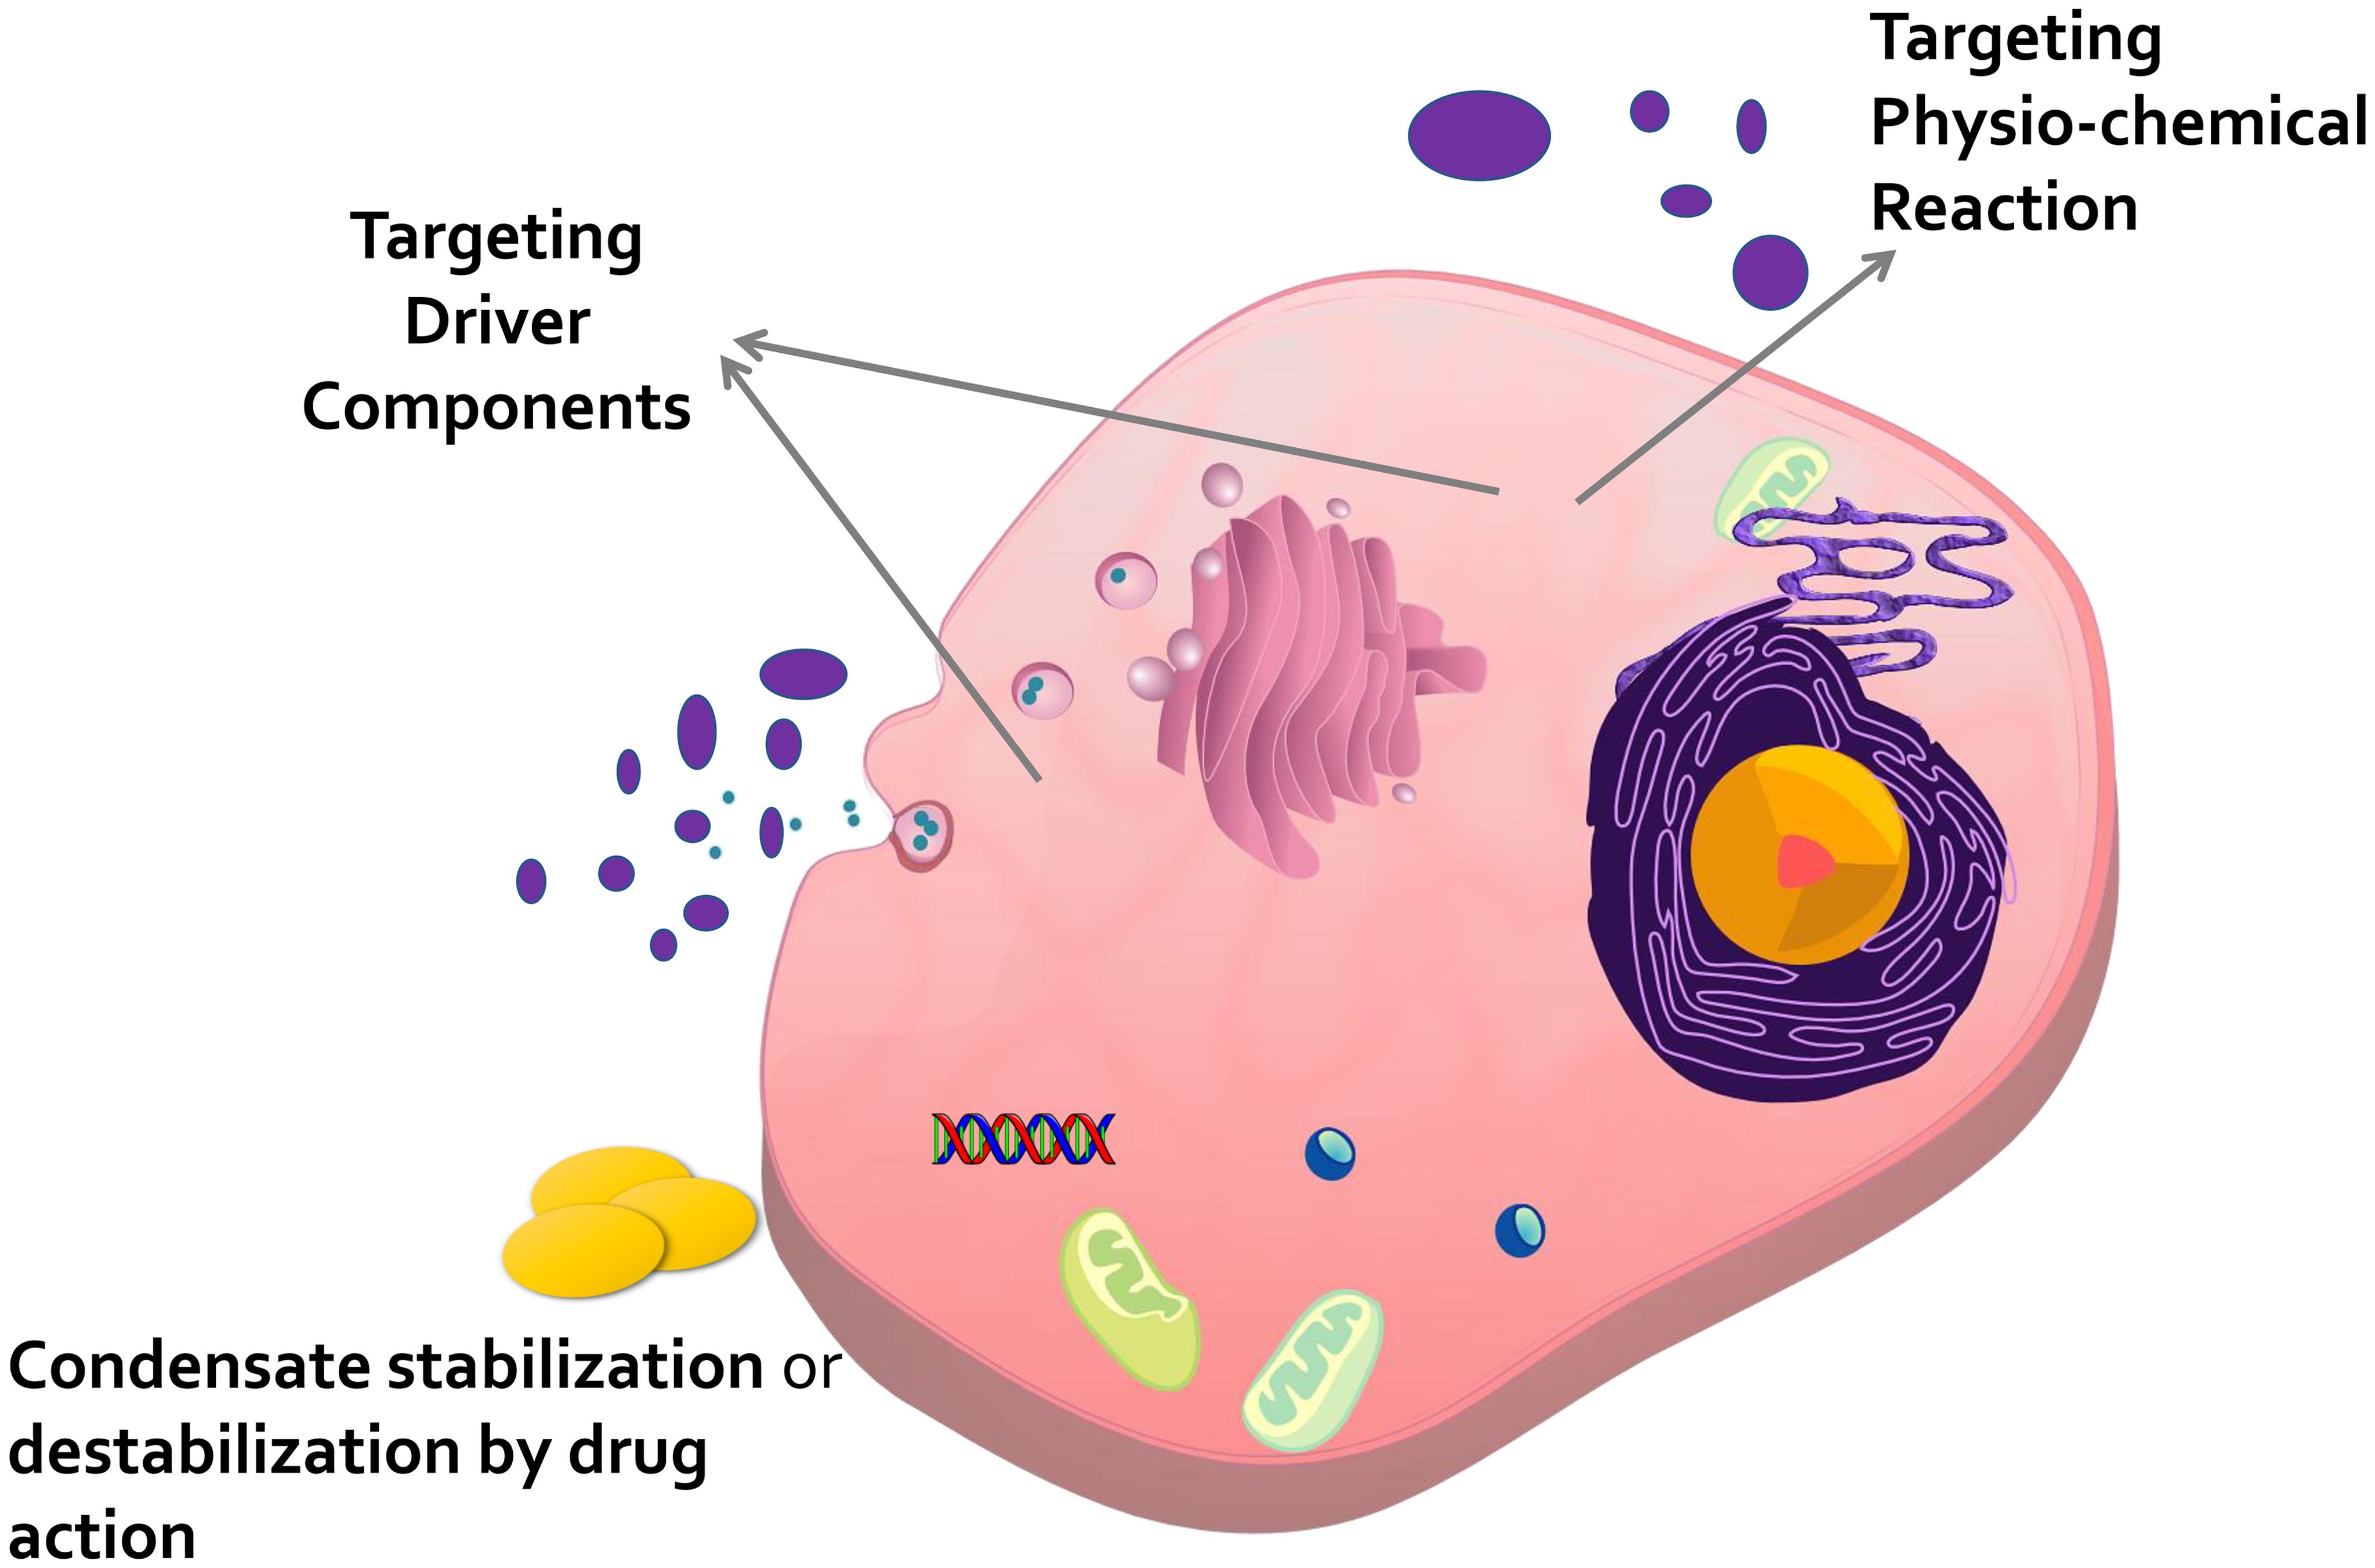 Expanded view of the cellular environment demonstrating how some proteins (blue dots) and nucleic acids (purple bent lines) partition into a biomolecular condensate that can be degraded (purple circle).